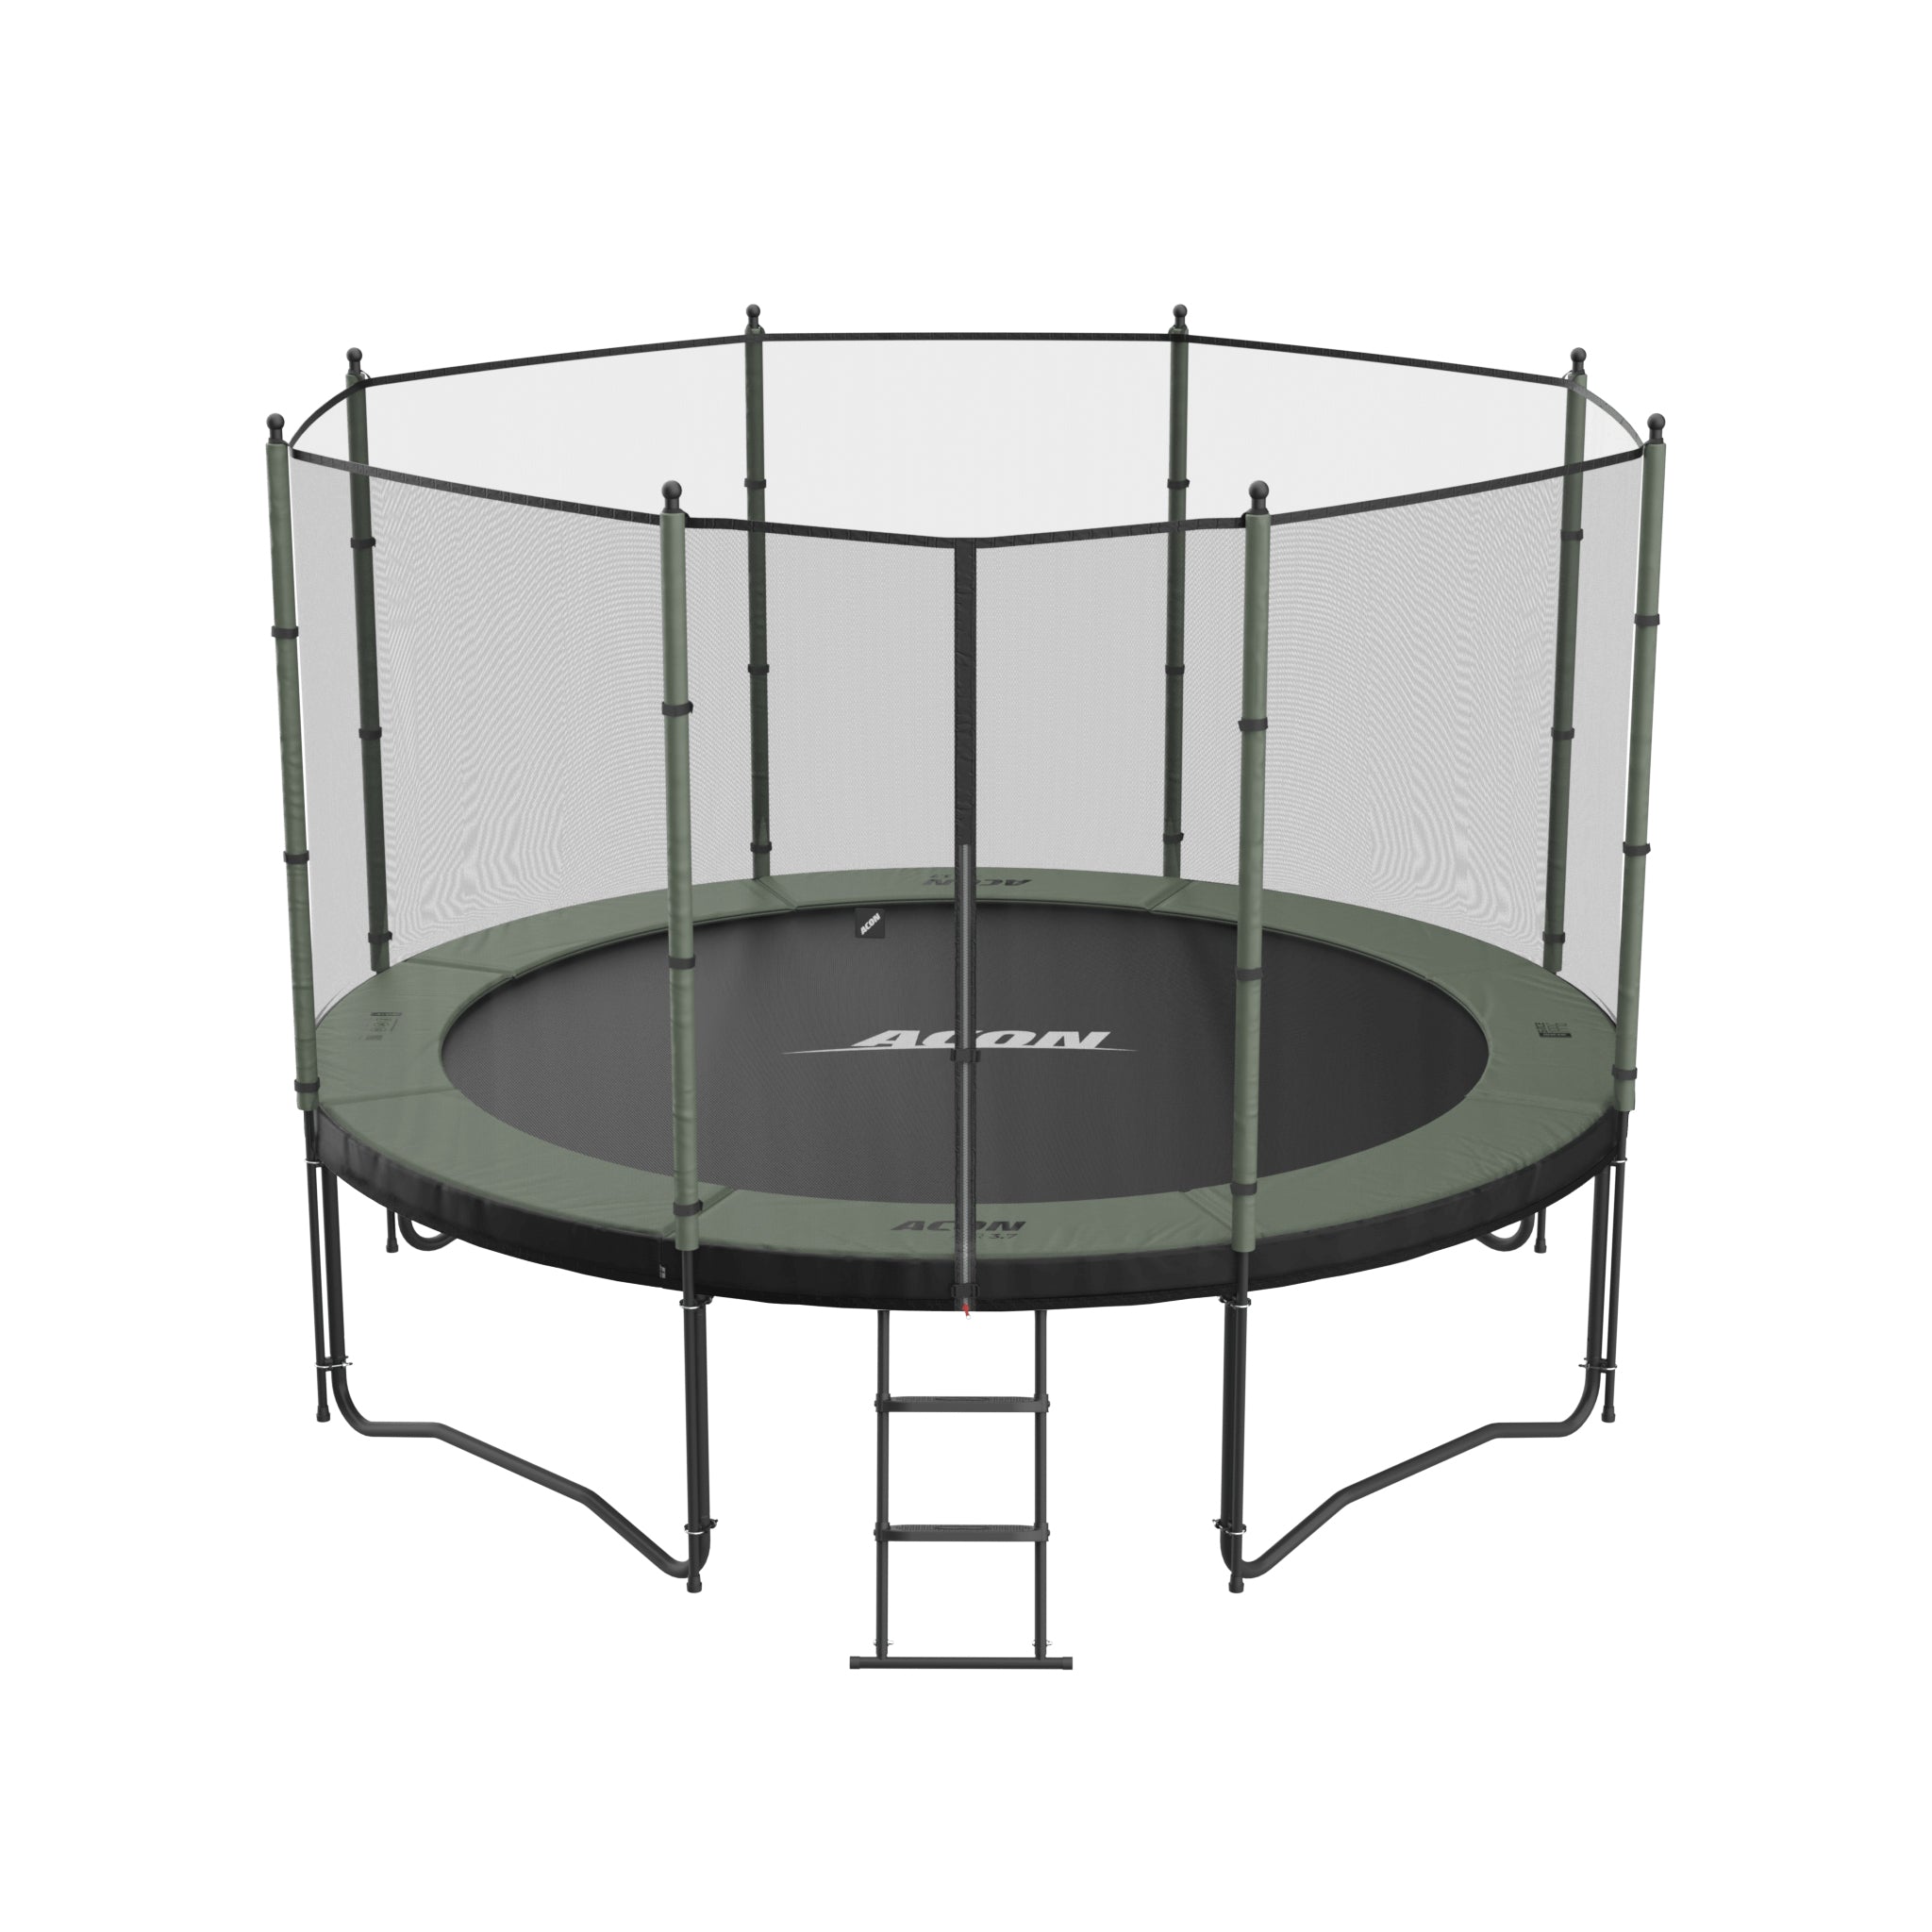 ACON Air 3,7m Trampoline with Standard Enclosure and ladder.